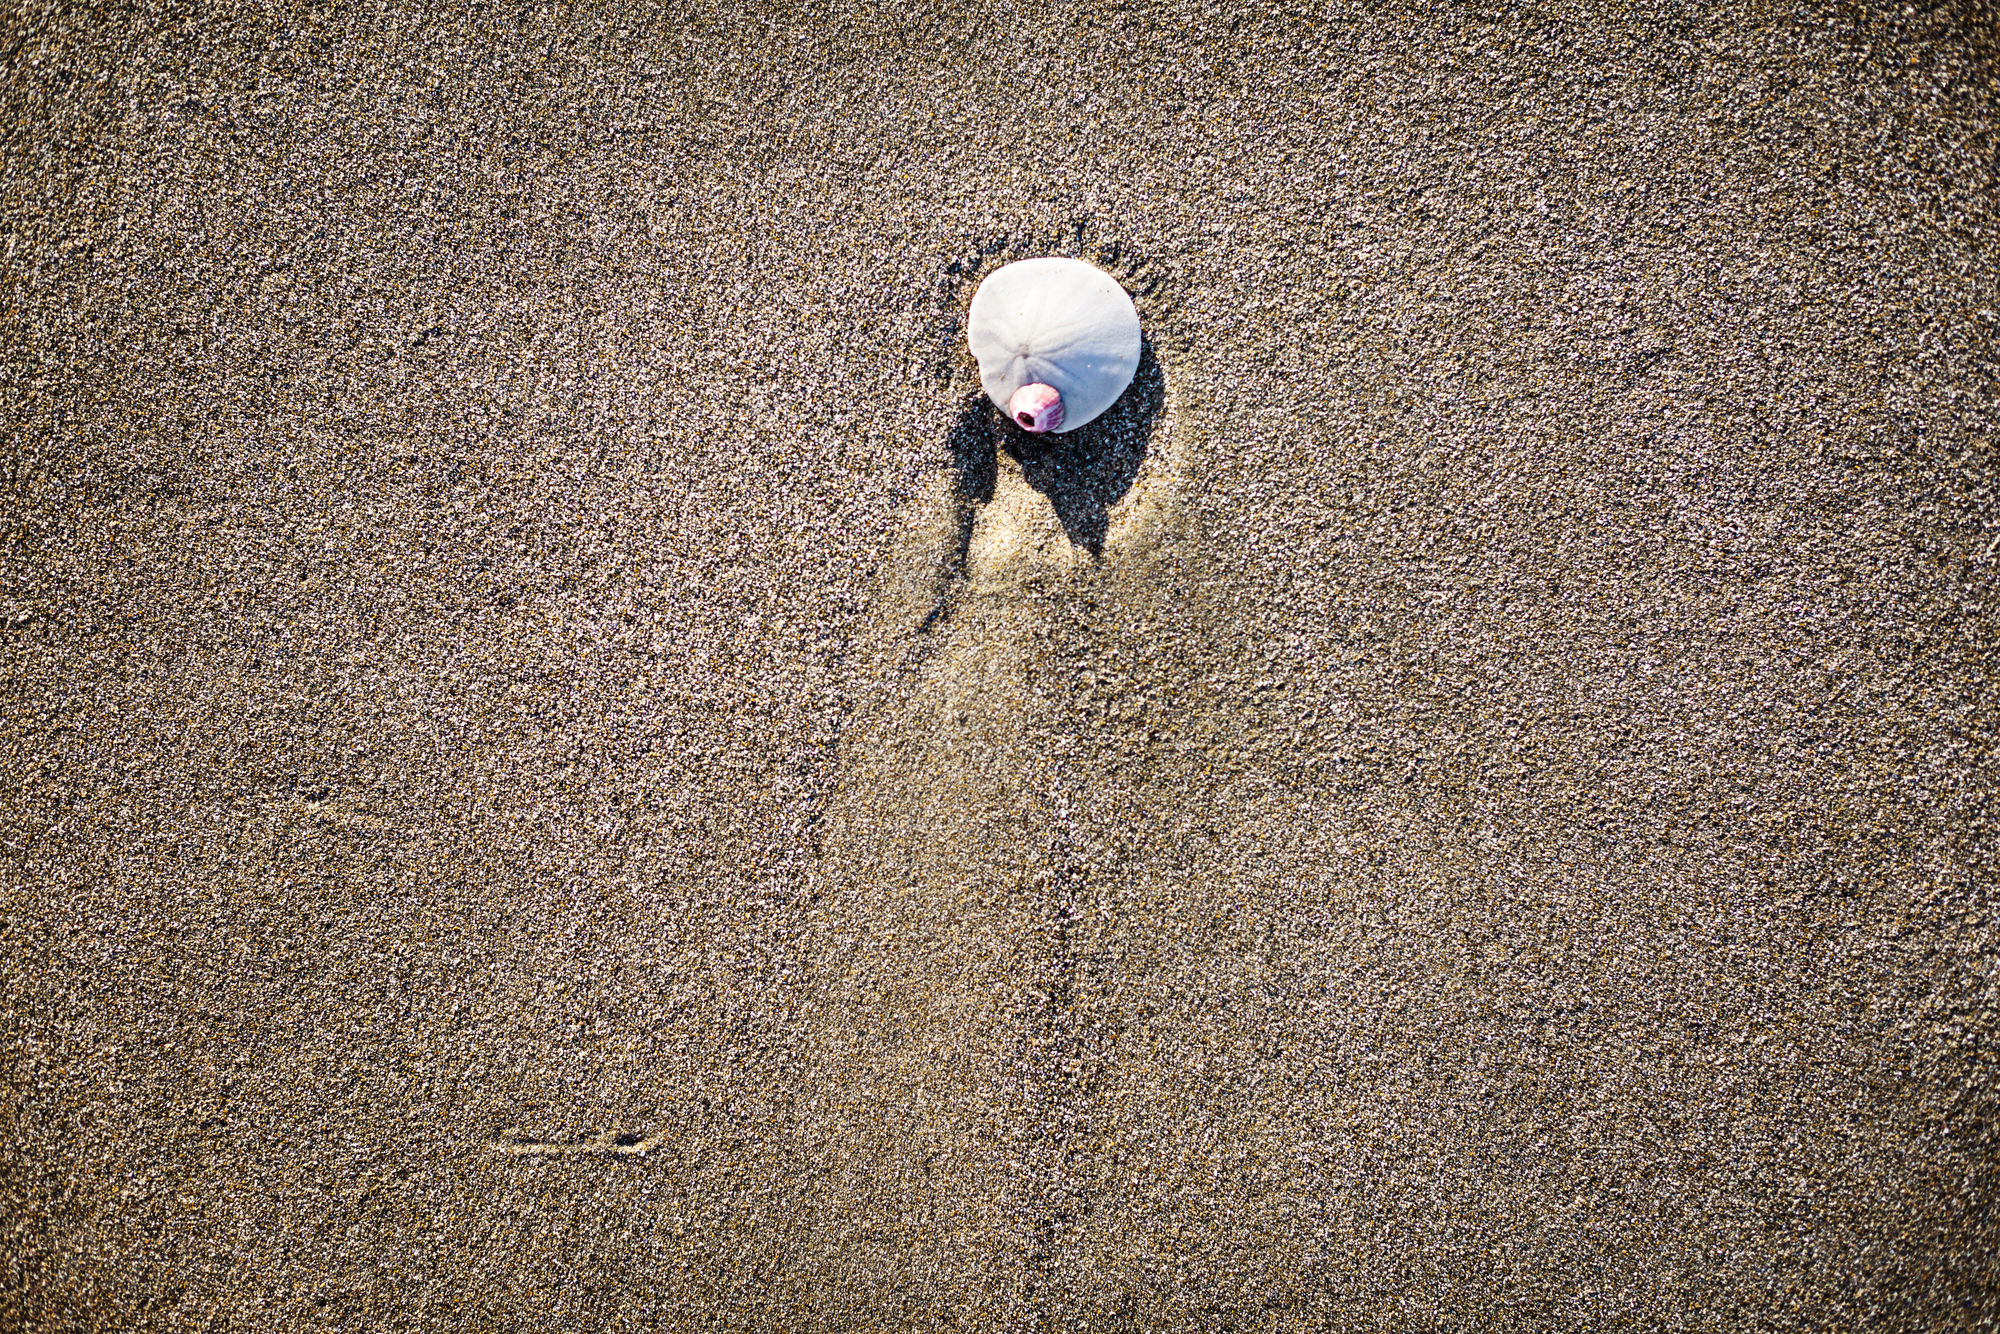 From Above View Of A Sand Dollar With A Shell Attached To It Stock Photo Pixeltote